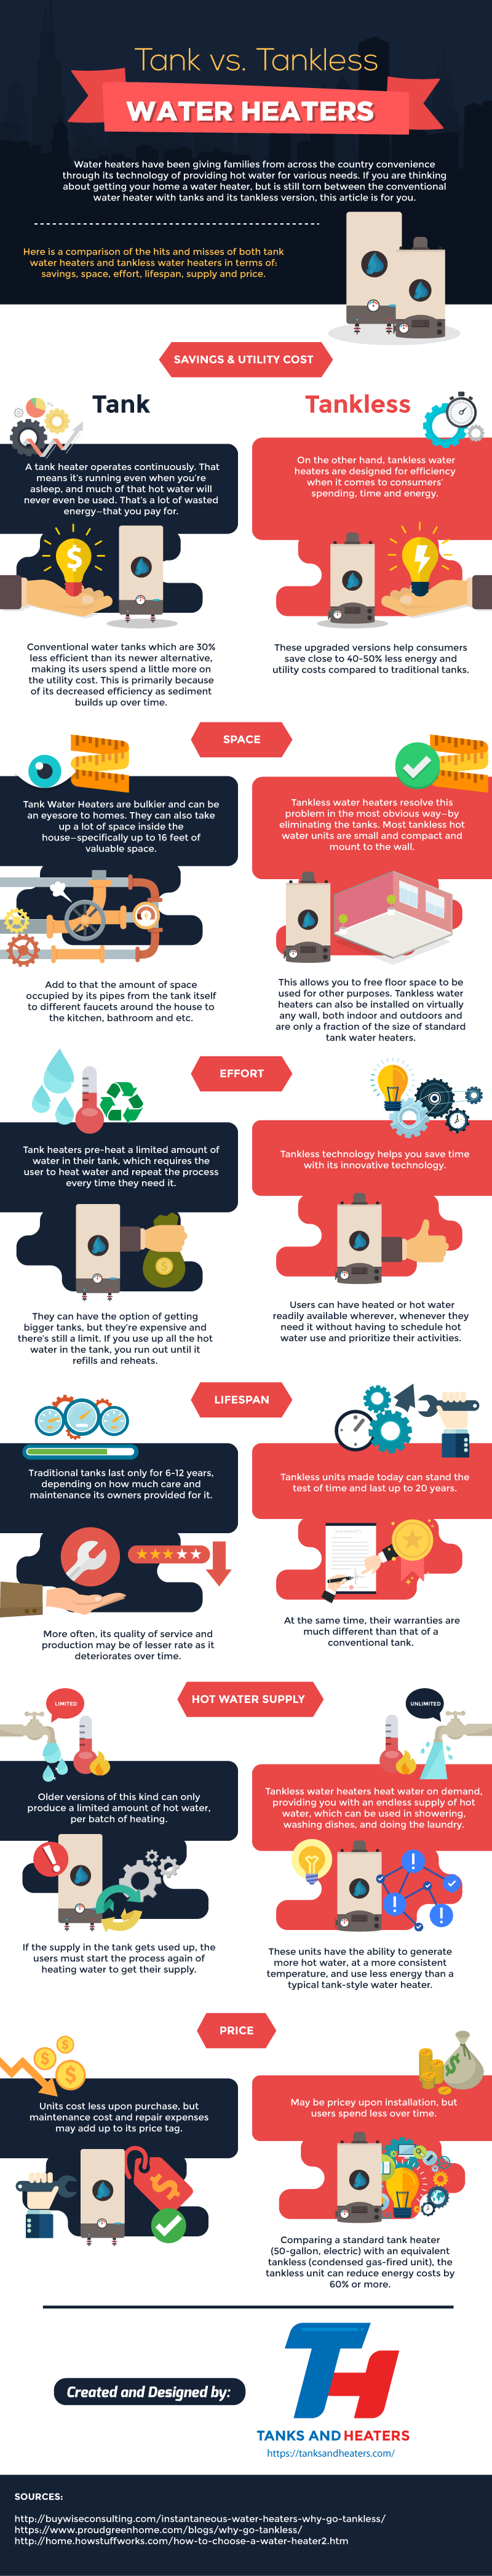 Tank vs. Tankless Water Heaters infographic